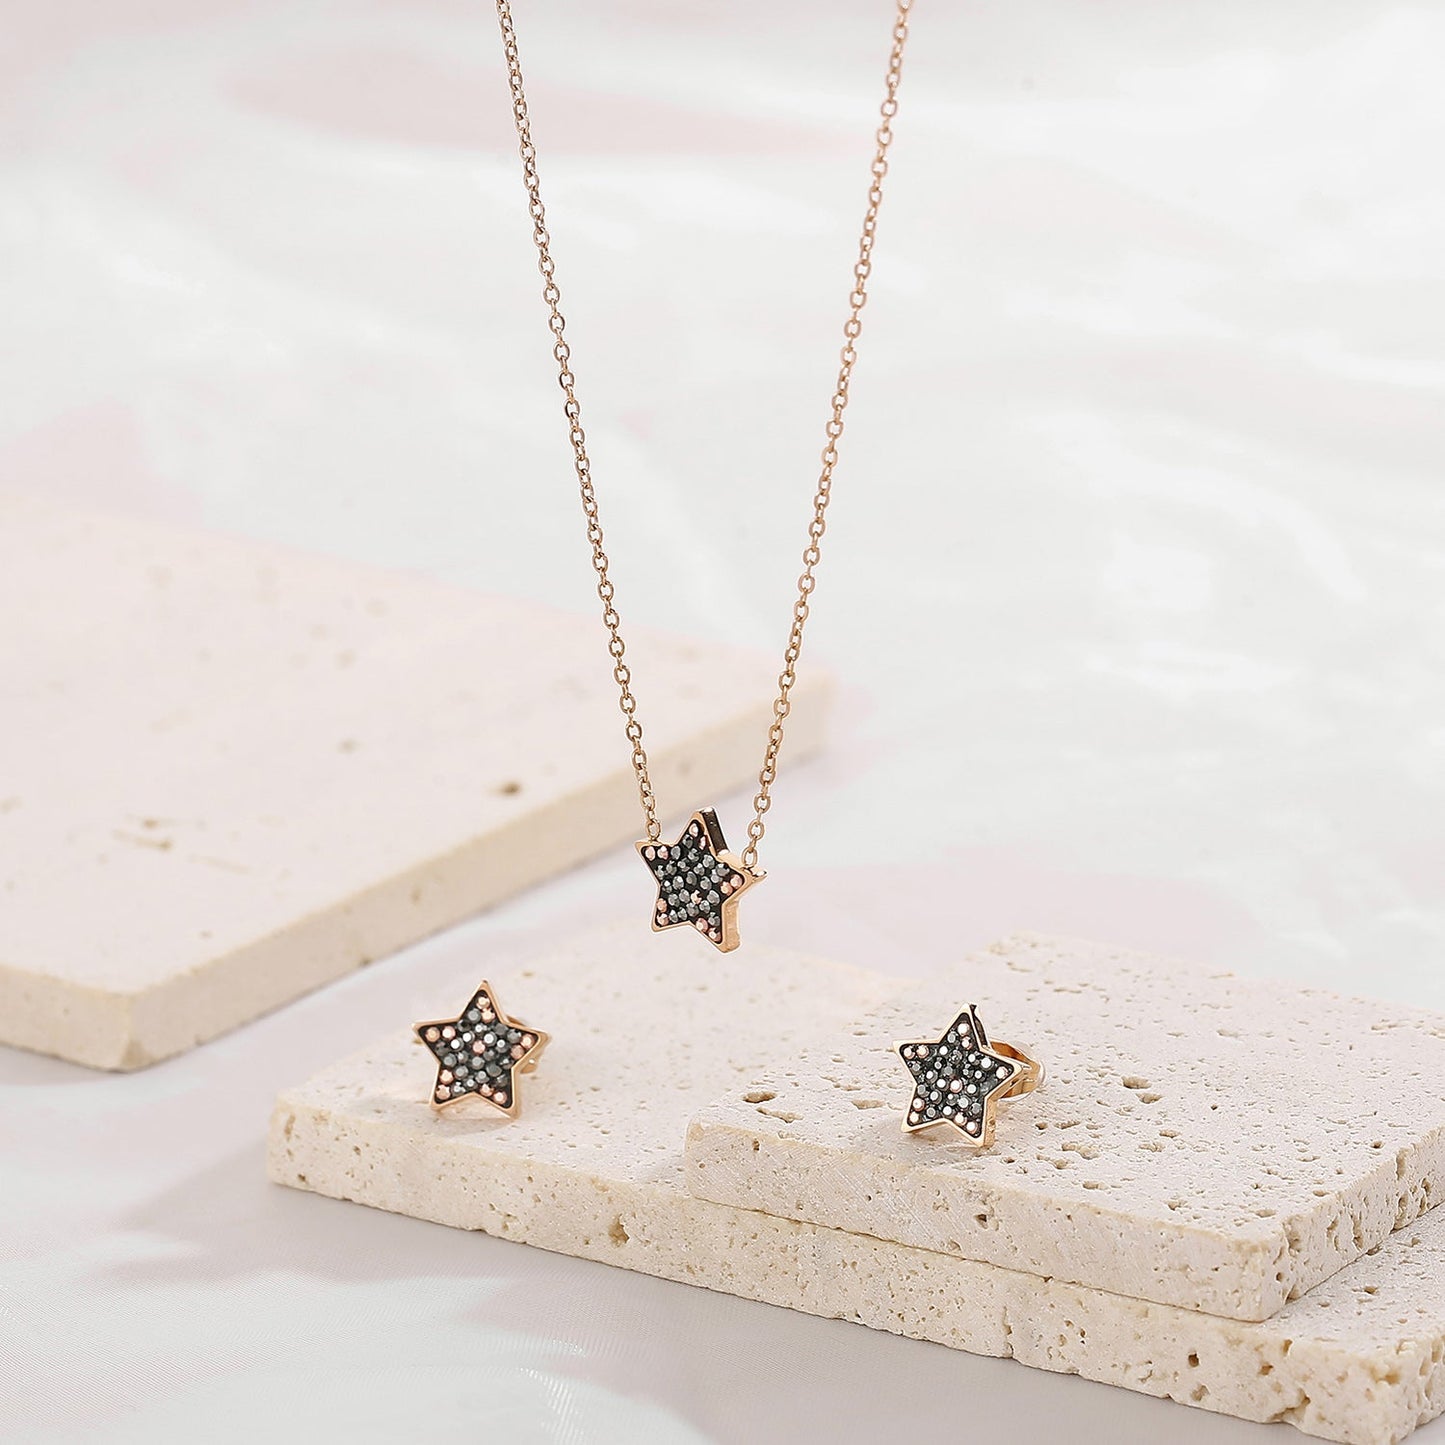 Star Necklace, Bracelet and Stud Earrings Jewelry Set - OMG! Rose